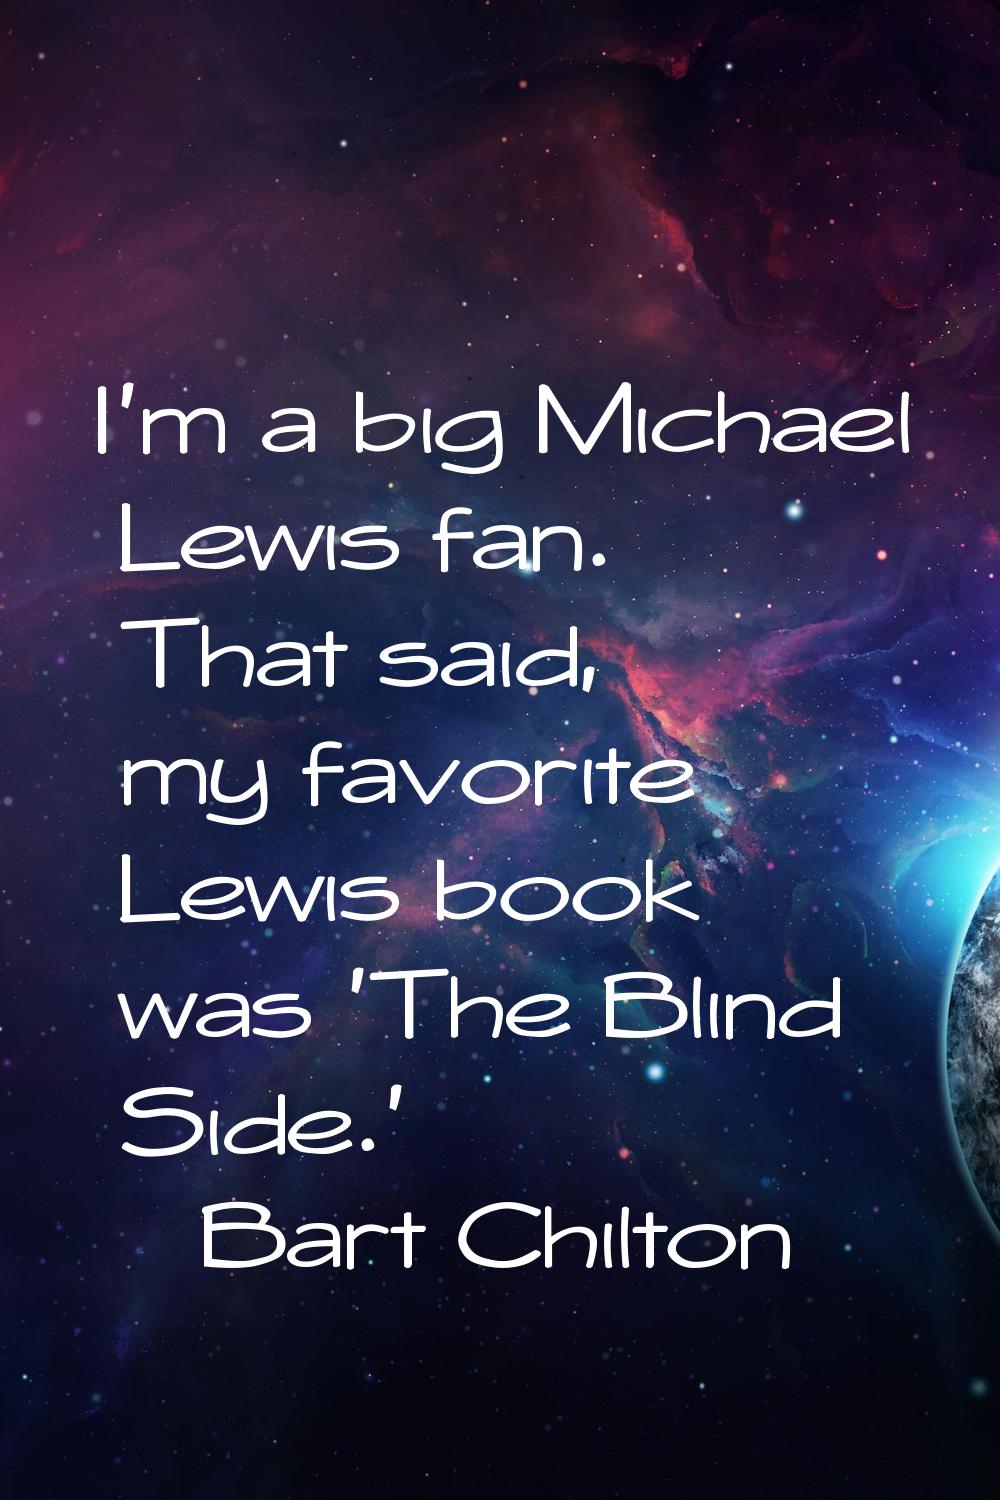 I'm a big Michael Lewis fan. That said, my favorite Lewis book was 'The Blind Side.'